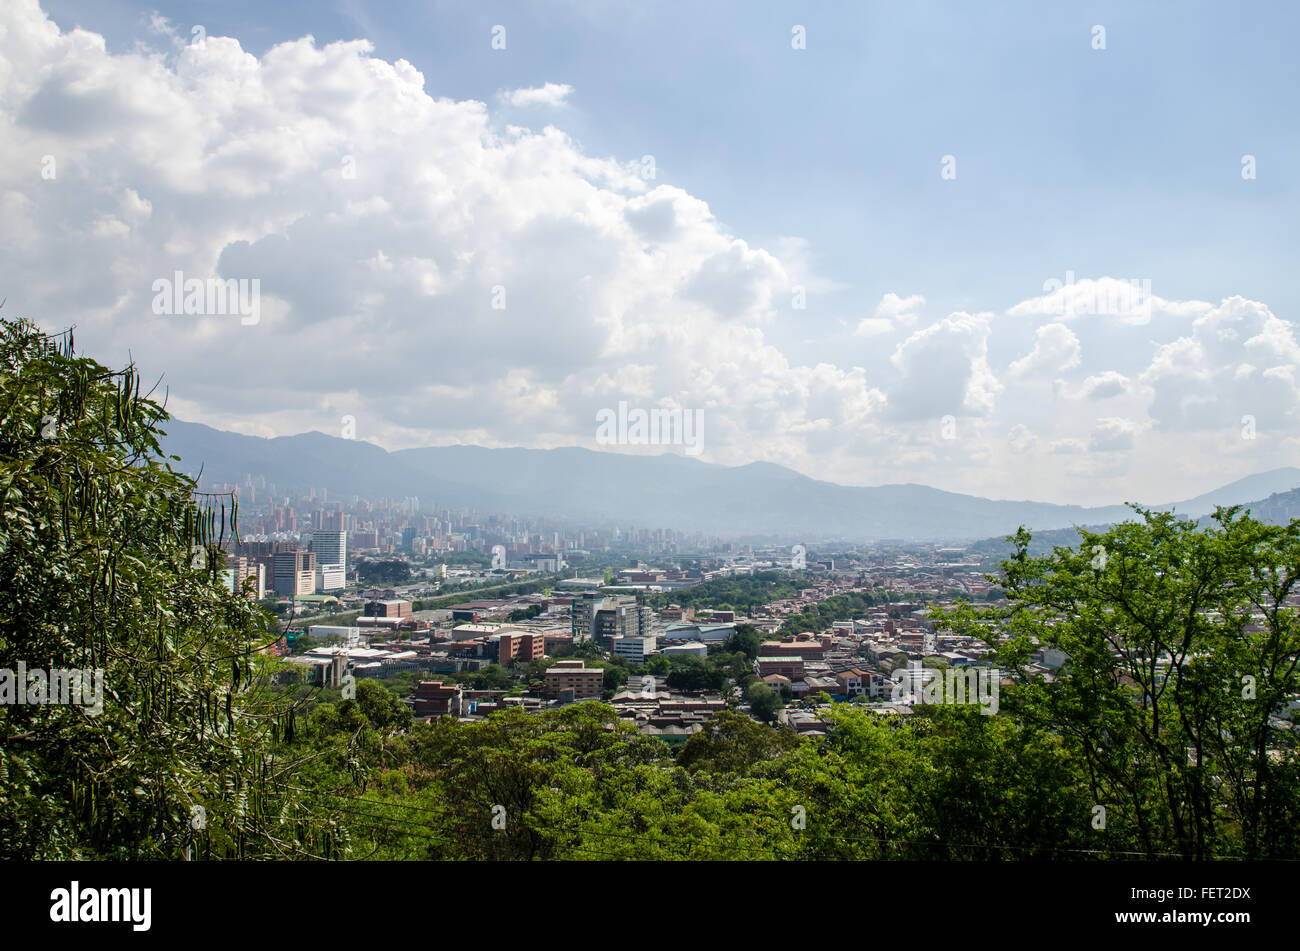 Views over the city of Medellin, Antioquia, Colombia Stock Photo